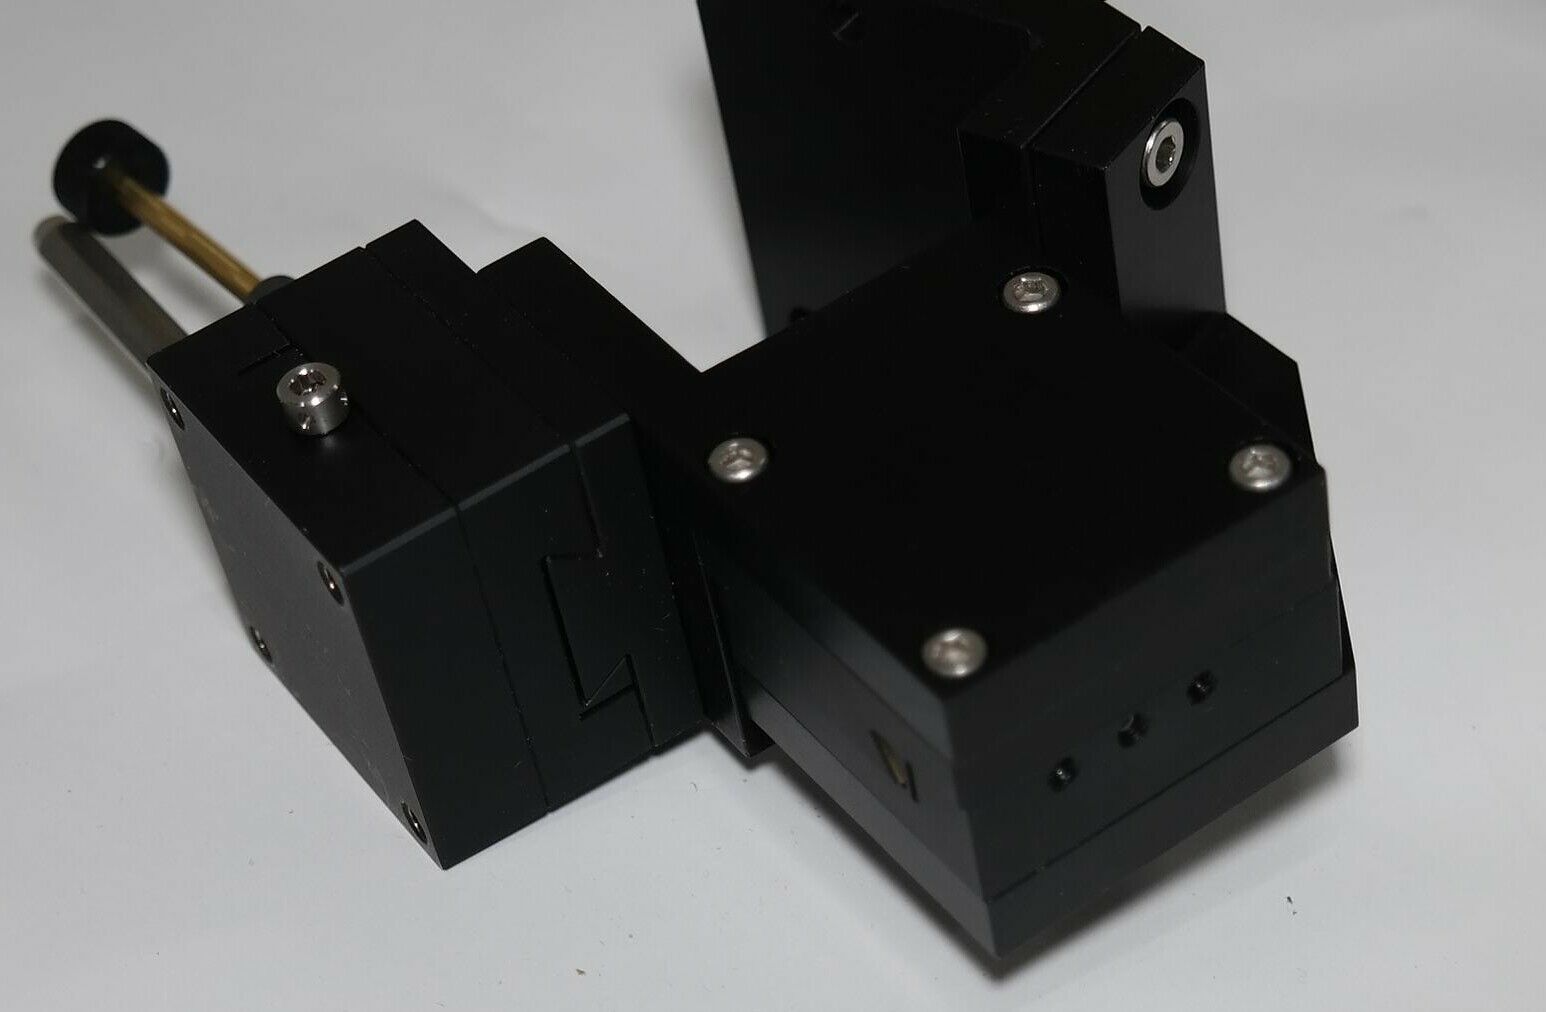 Optosigma Xyz Linear Stage 40mm X 40mm Dove Tail 3-axis Positioner + Bracket